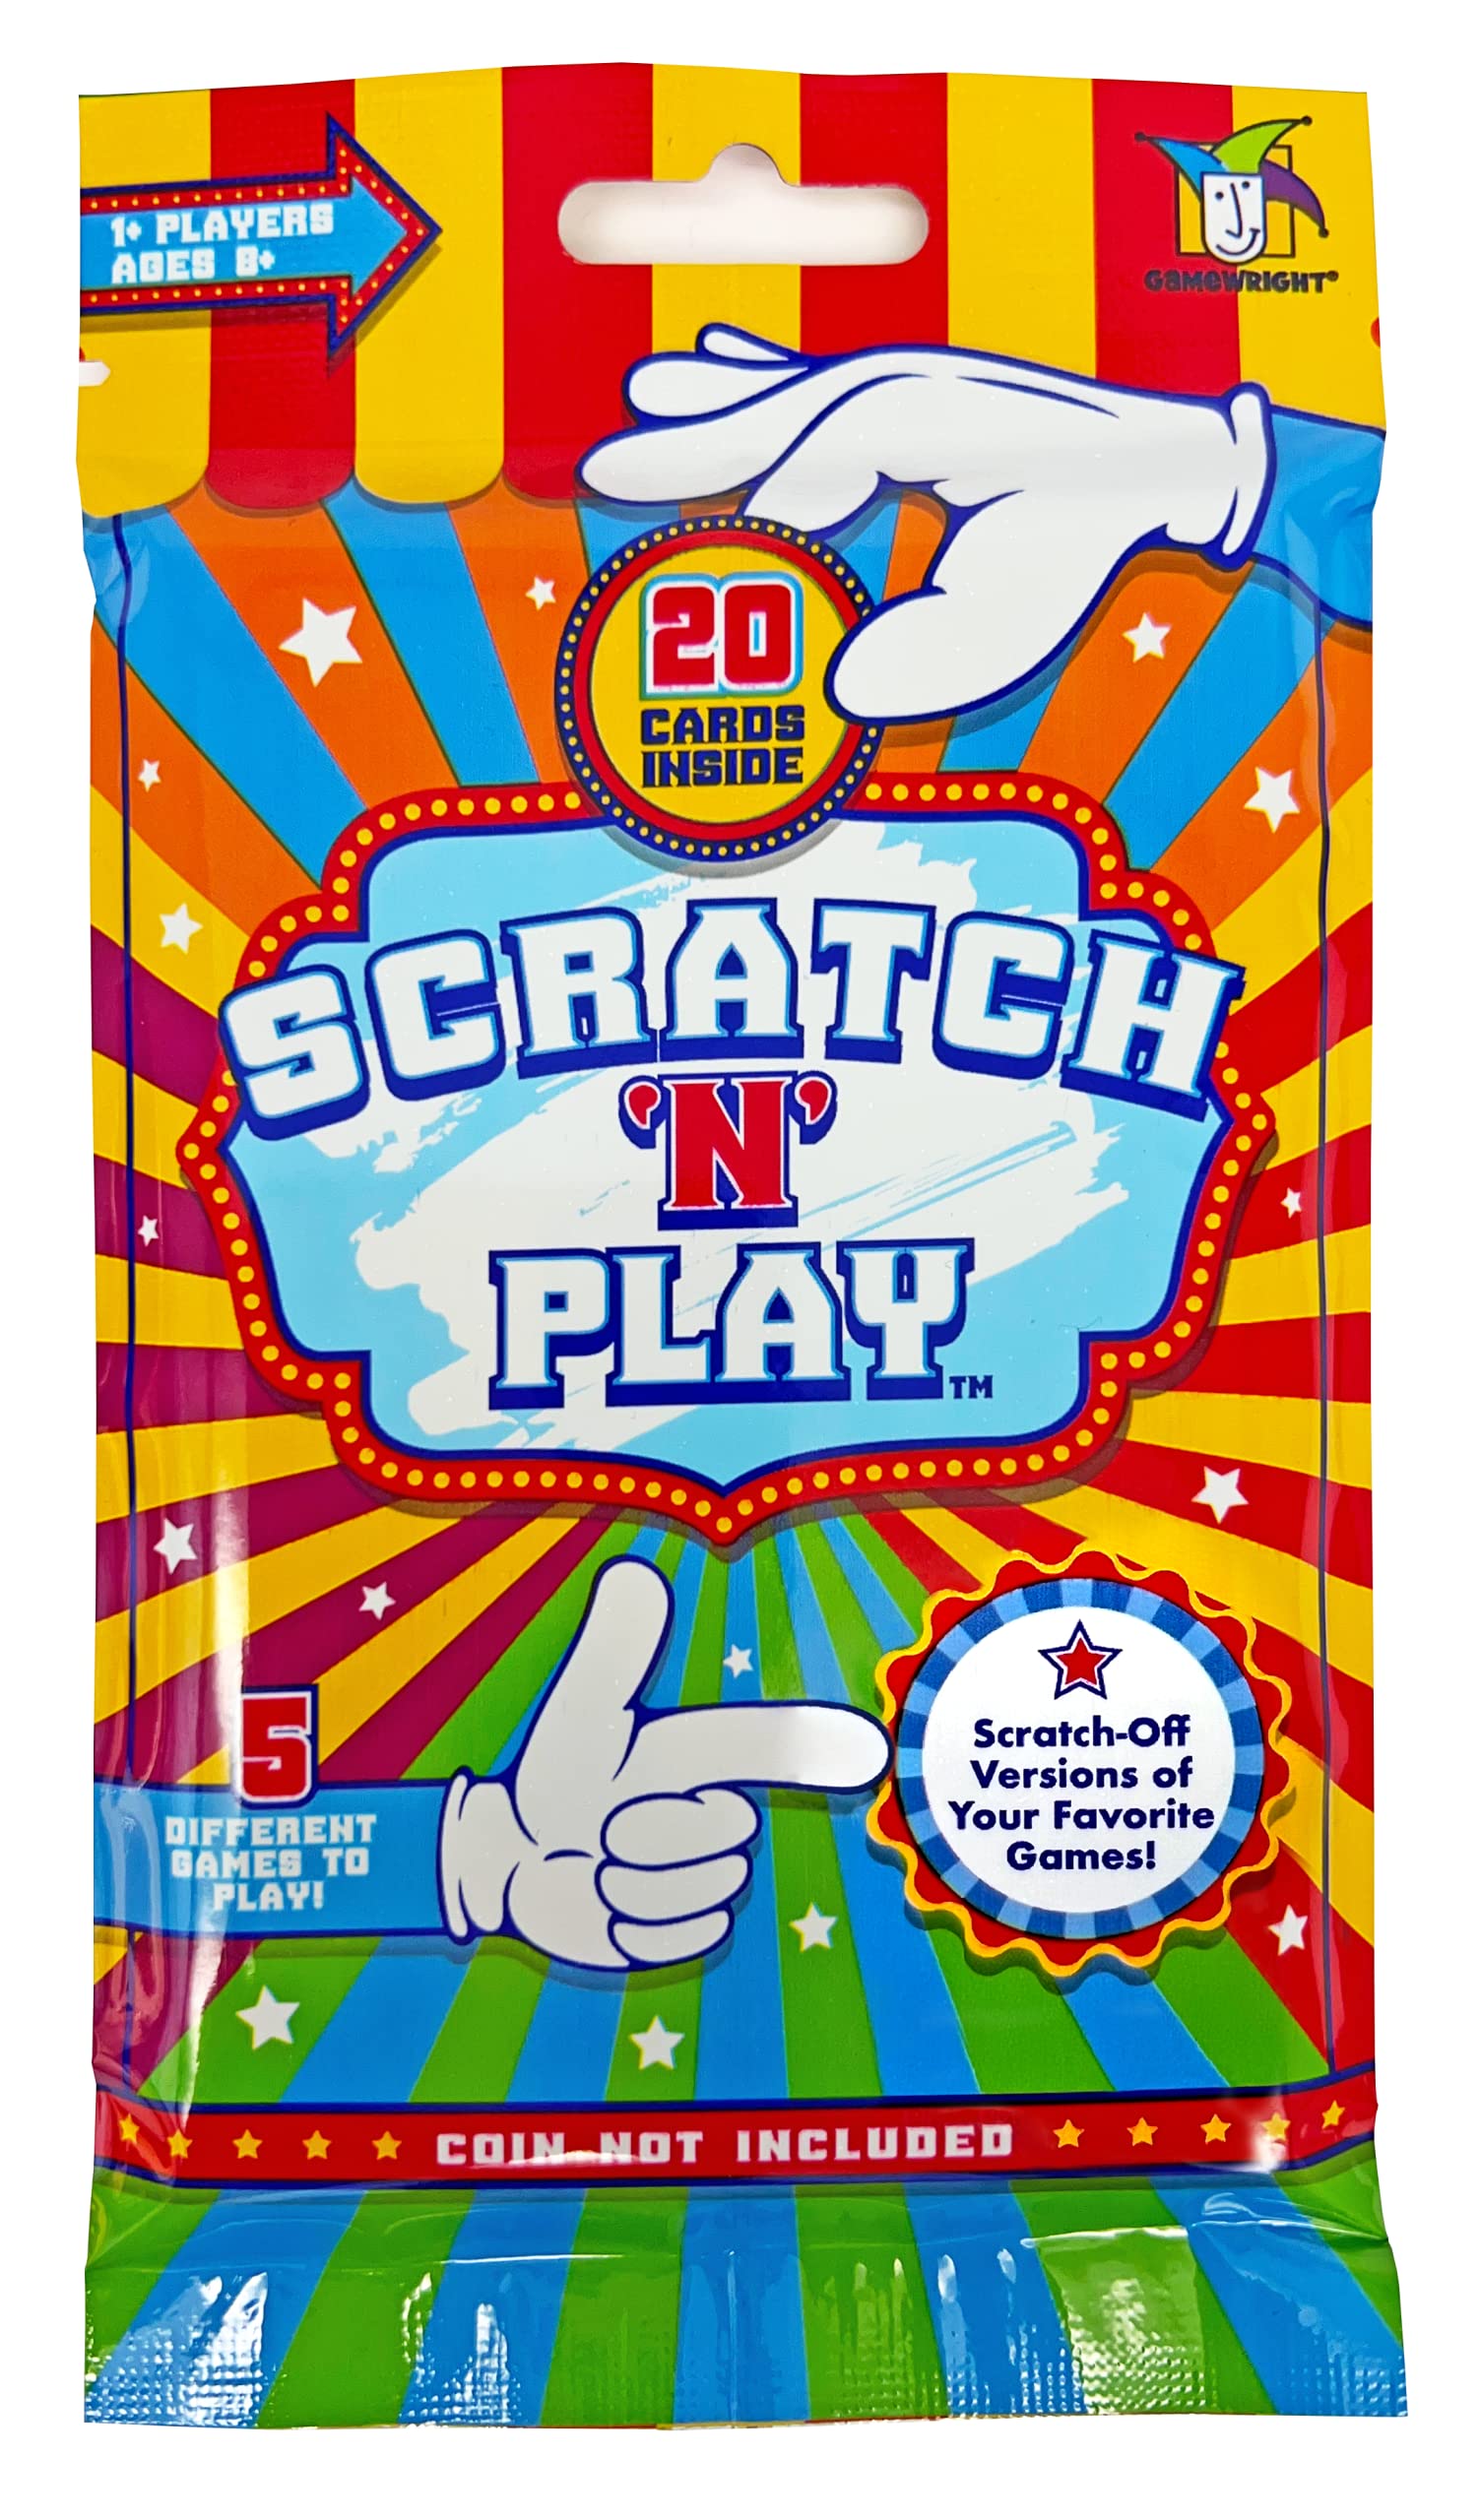 Scratch 'N Play- Scratch-Off Versions of Your Favorite Games!